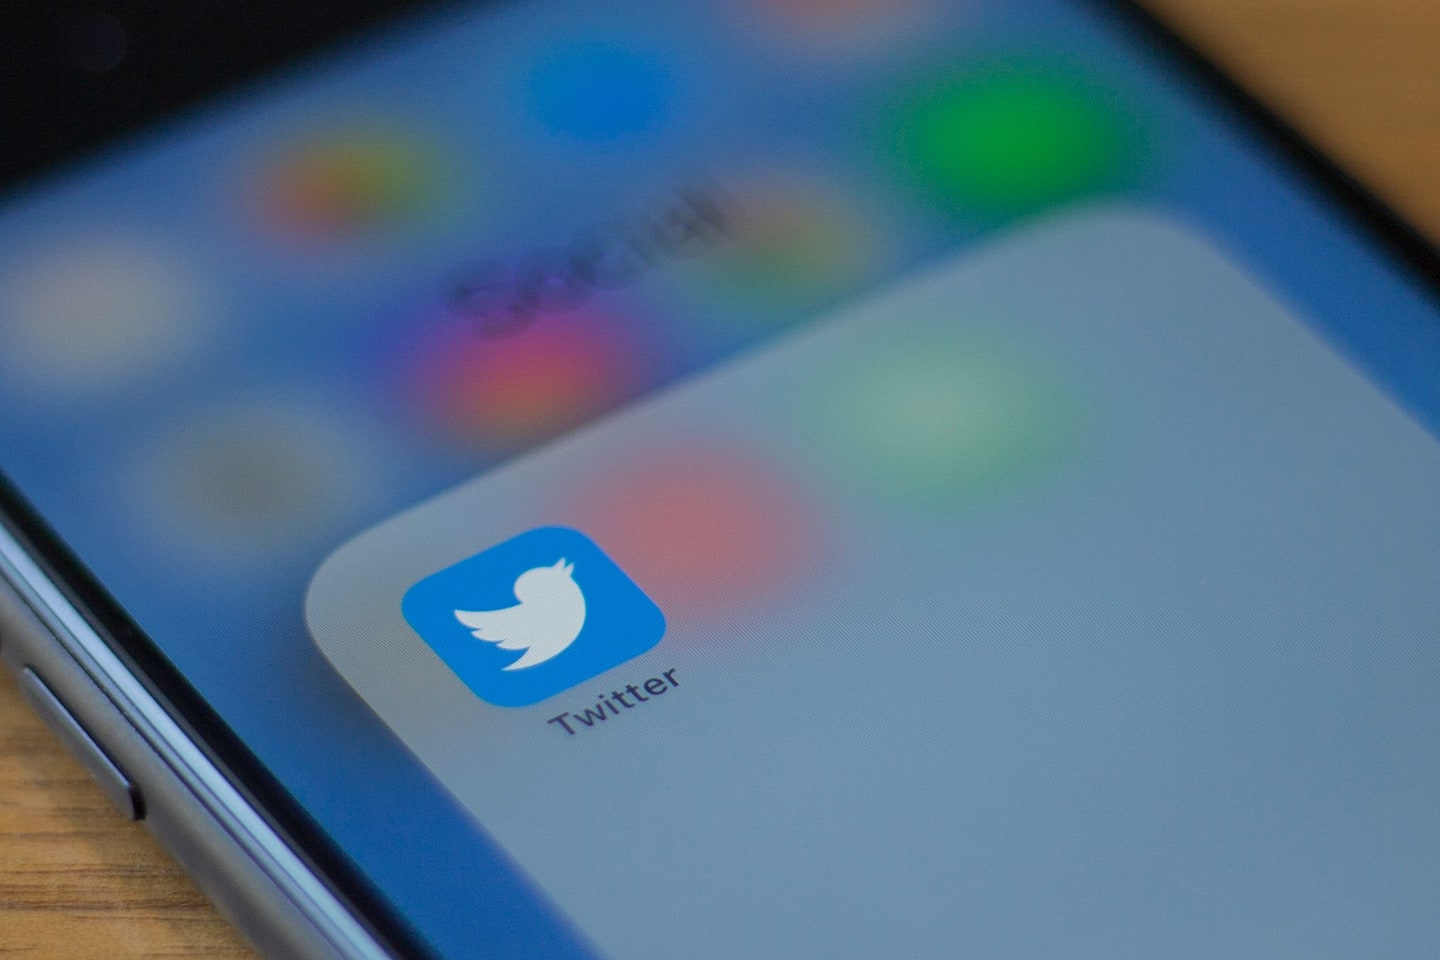 Access to Twitter disrupted by technical problems